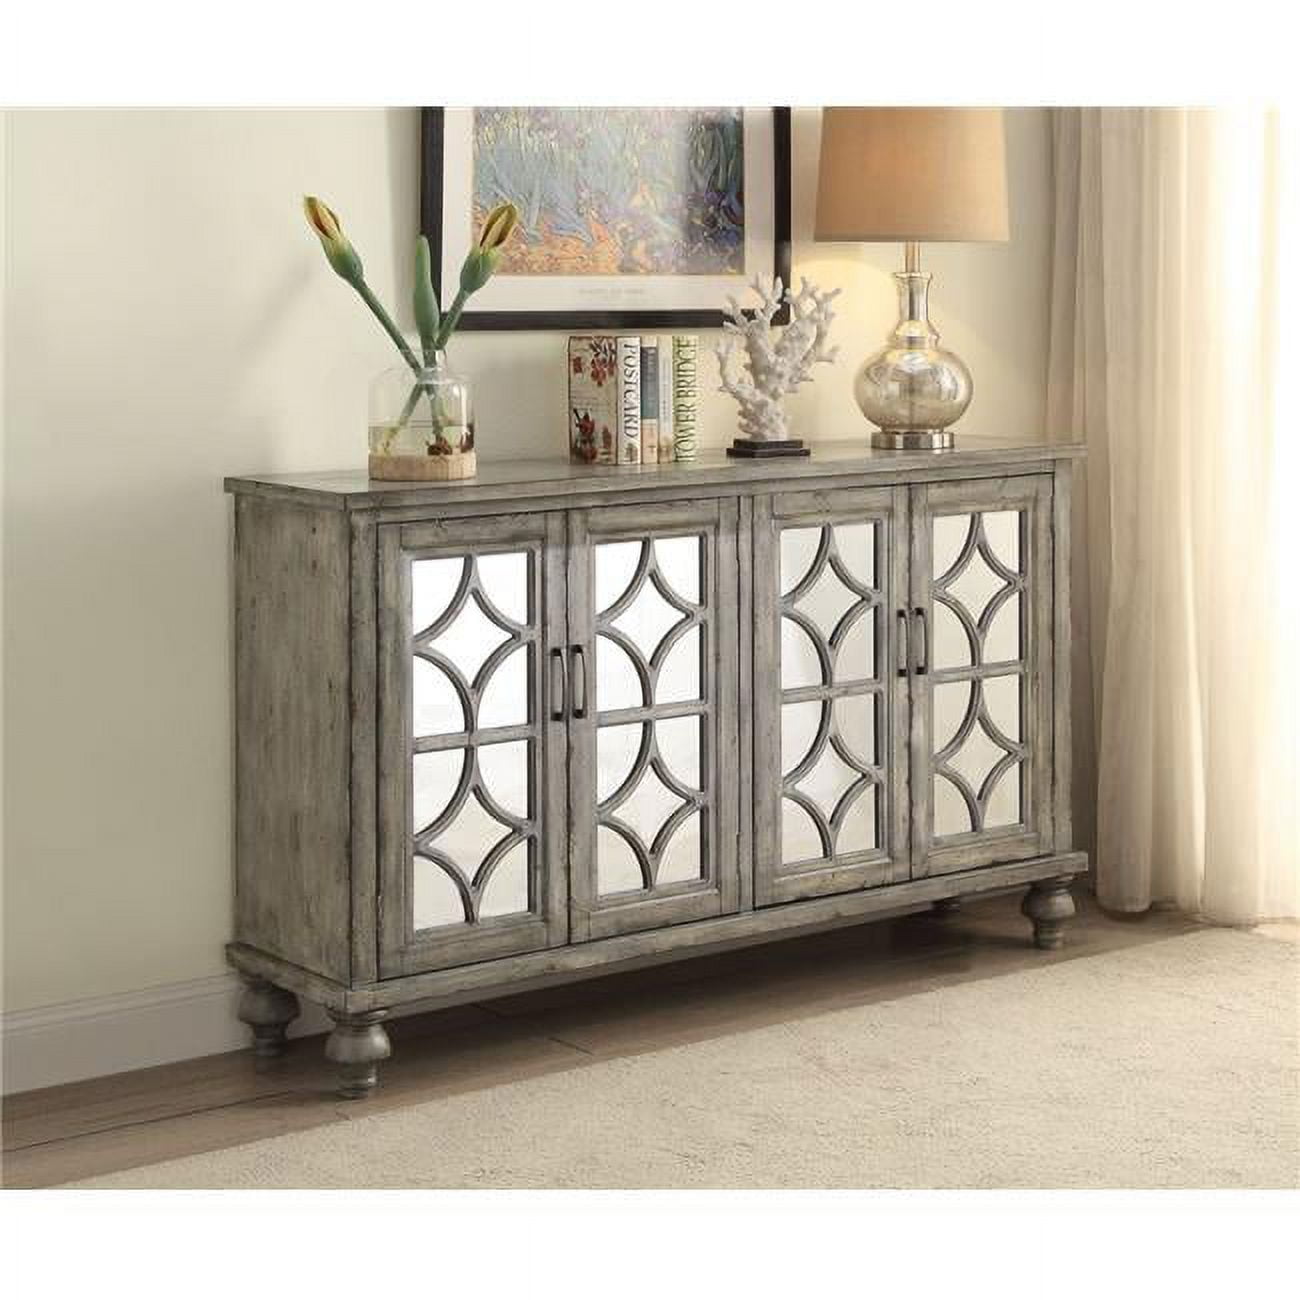 Picture of ACME 90280 Velika Console Table, Weathered Gray - 37 x 60 x 15 in.